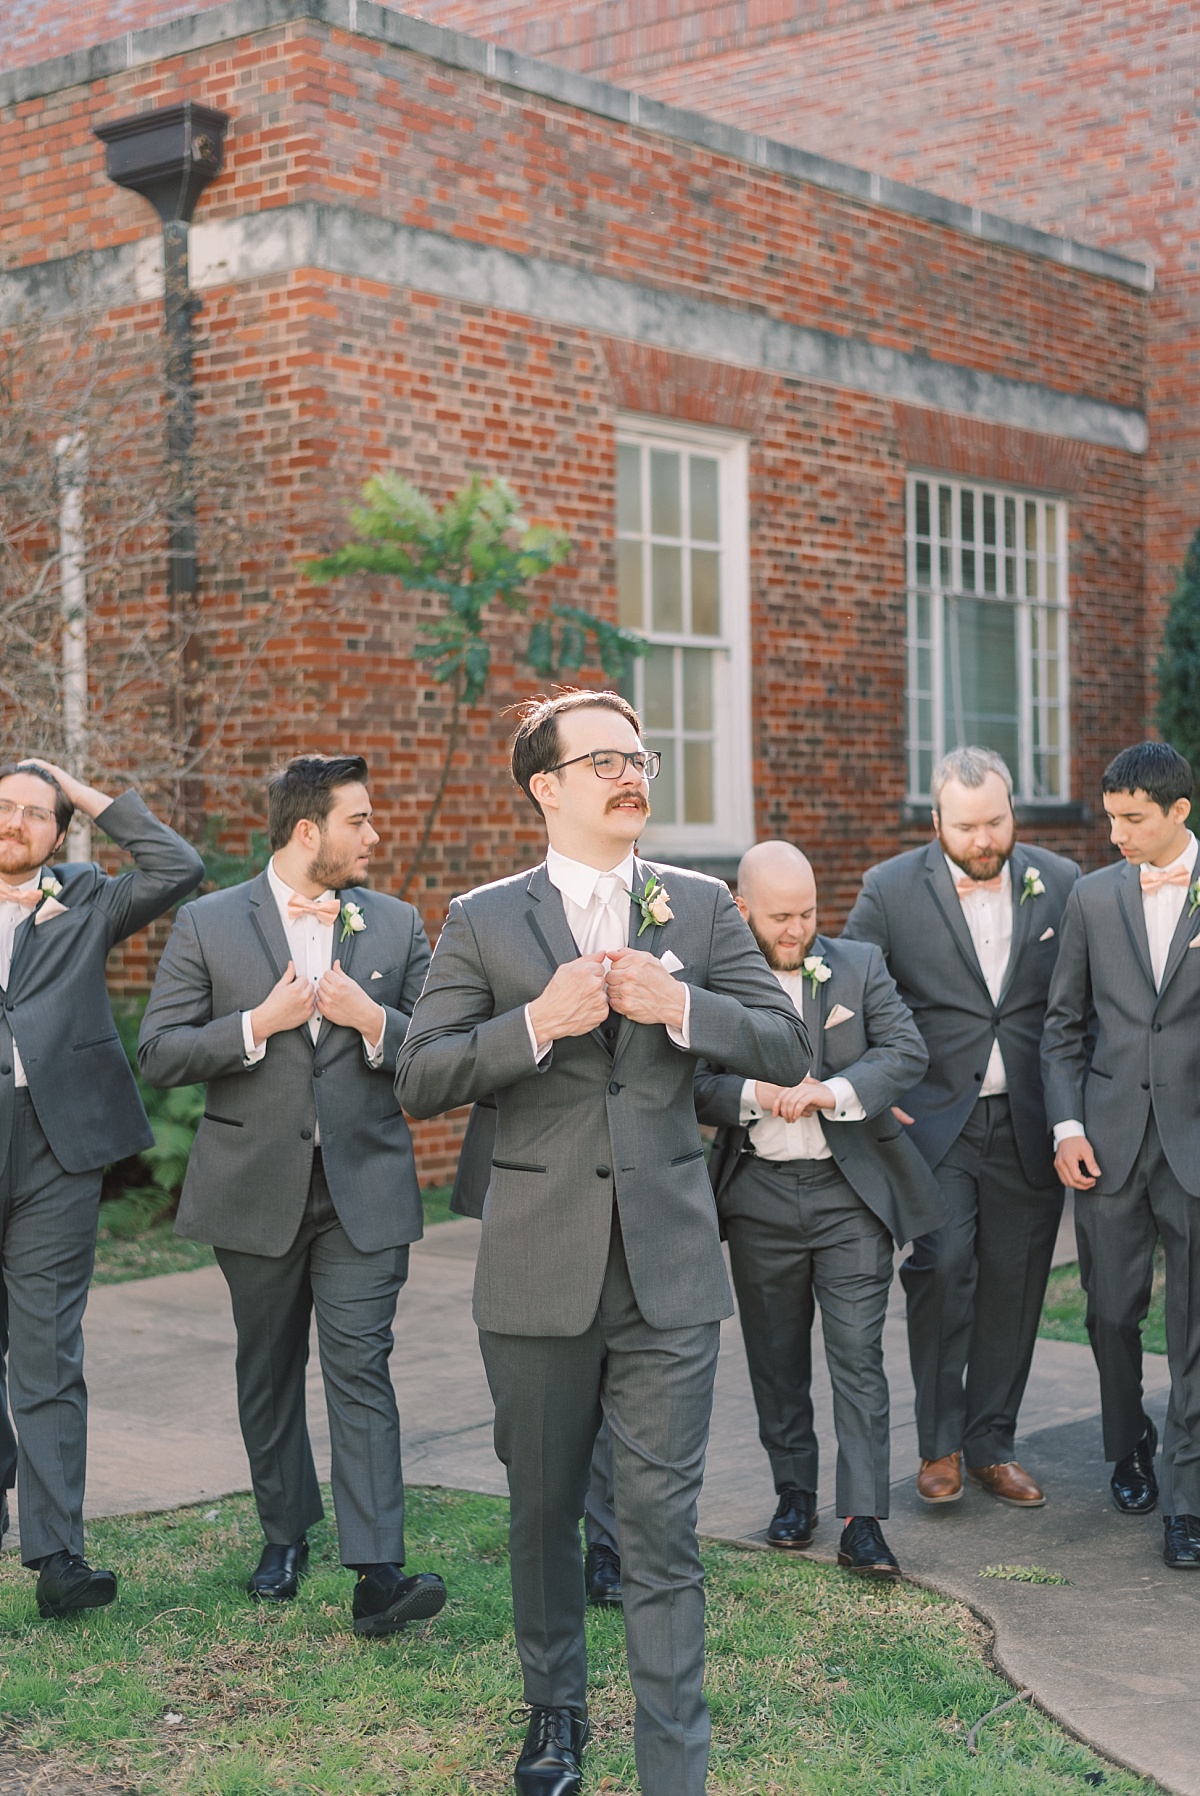 A candid shot by Paige Vaughn Photography of a groom walking with his groomsmen dressed in grey tuxes as they prepare for his wedding day at TFWC Mansion in Austin, Texas.